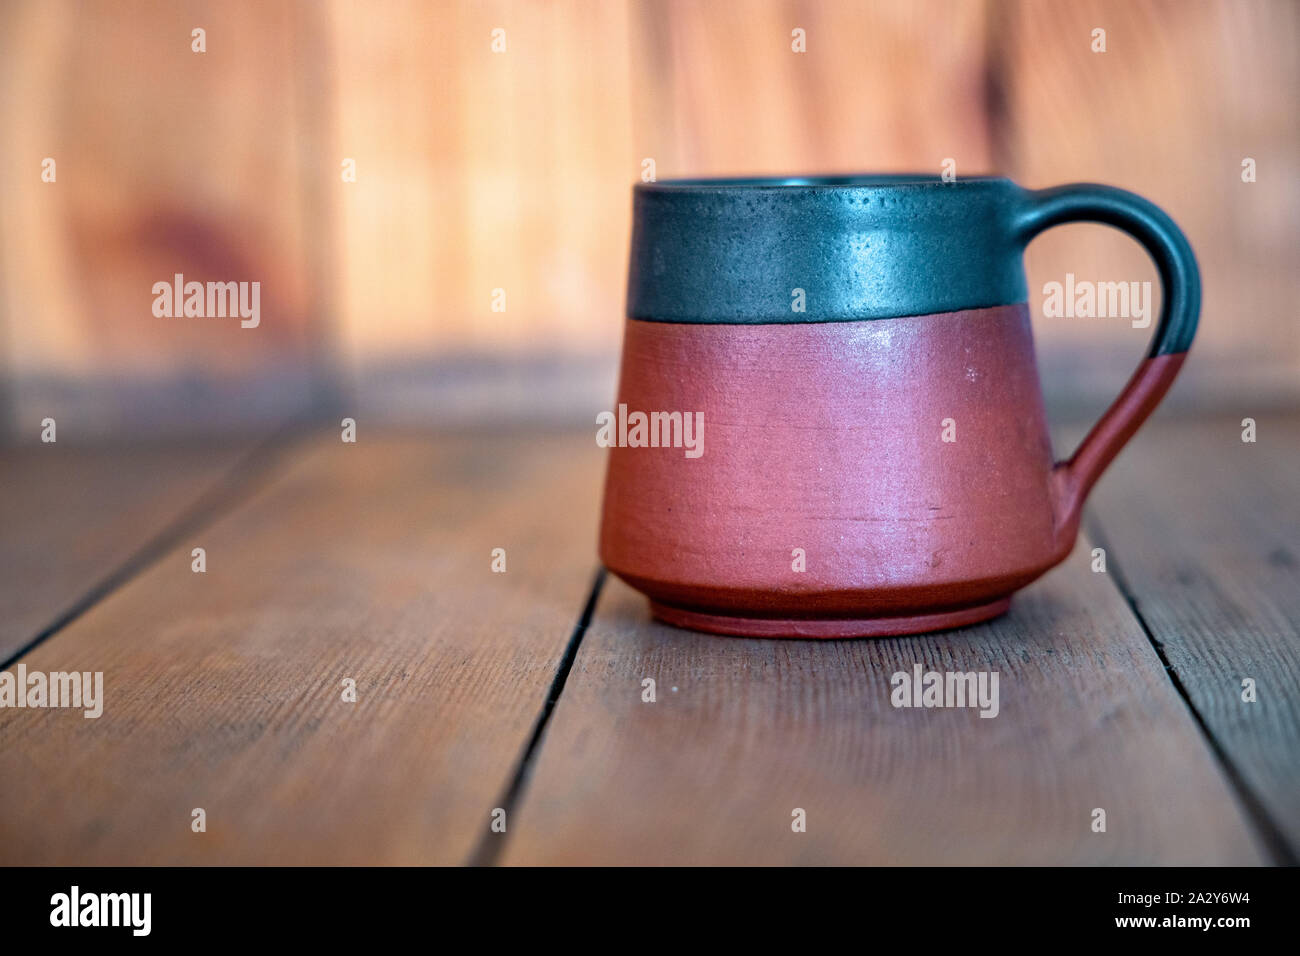 A cup of tea placed on a wooden table. Stock Photo